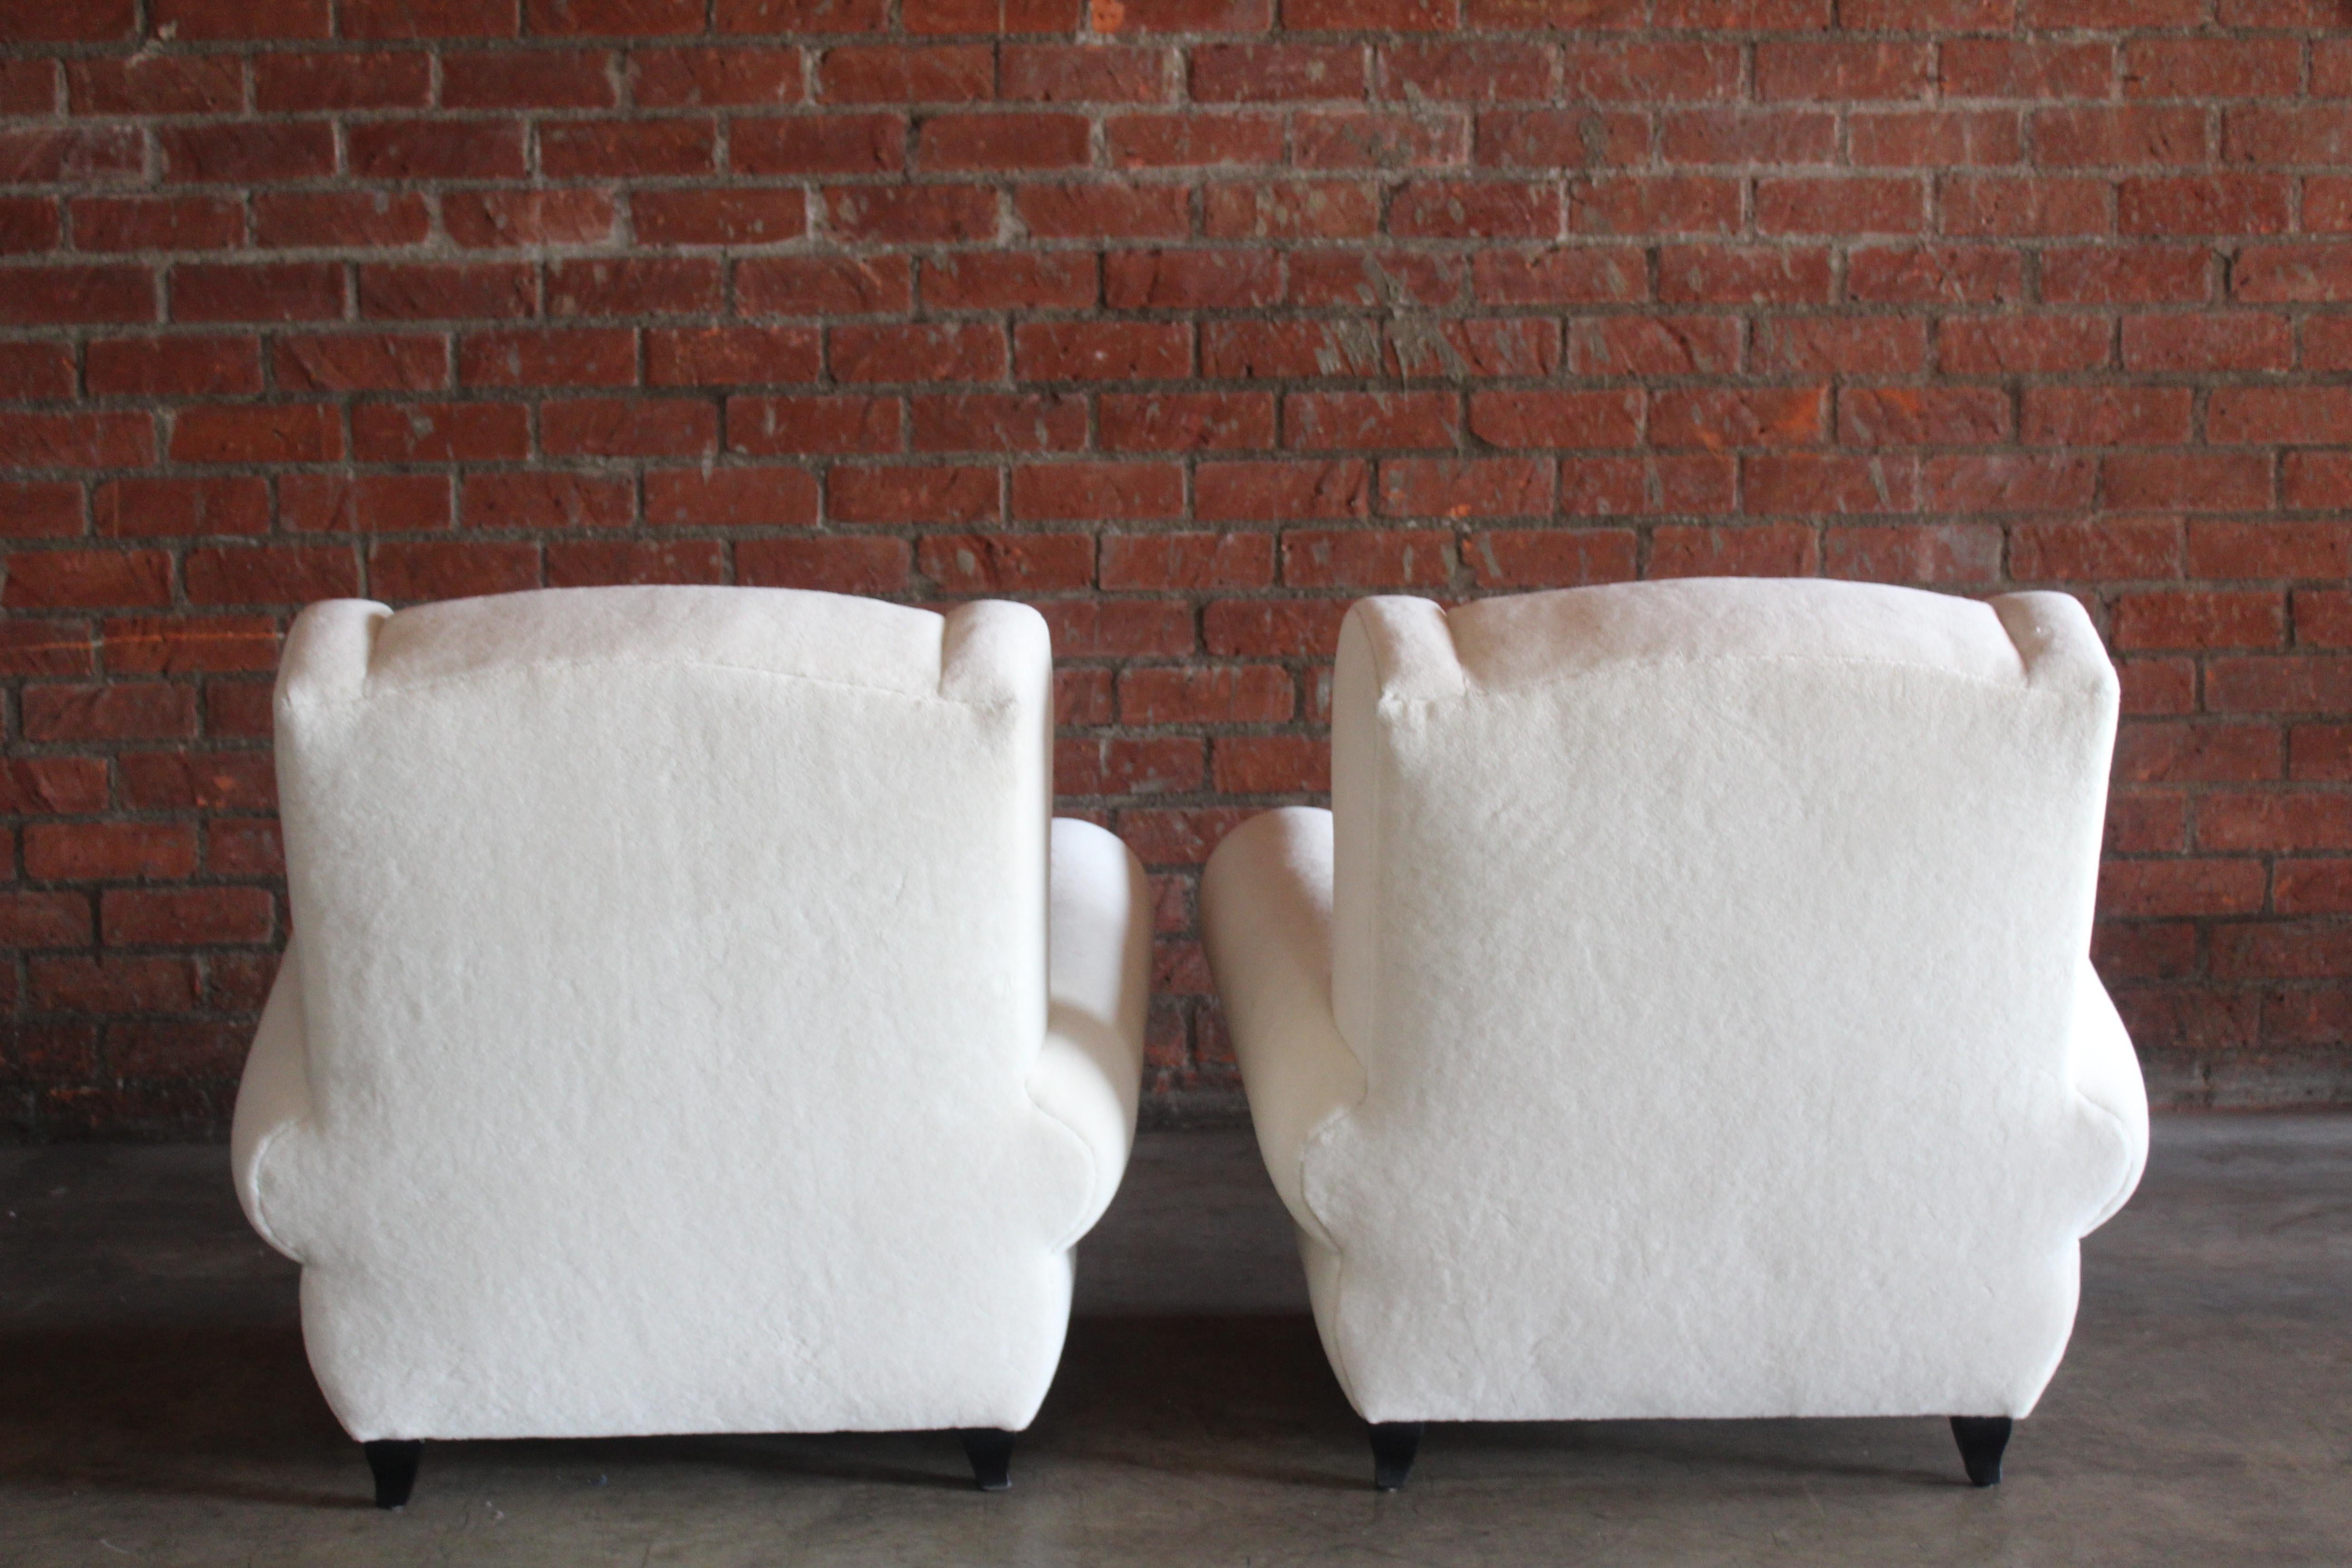 Pair of 1930s Maurice Rinck Style Art Deco French Club Chairs in Alpaca Wool For Sale 14